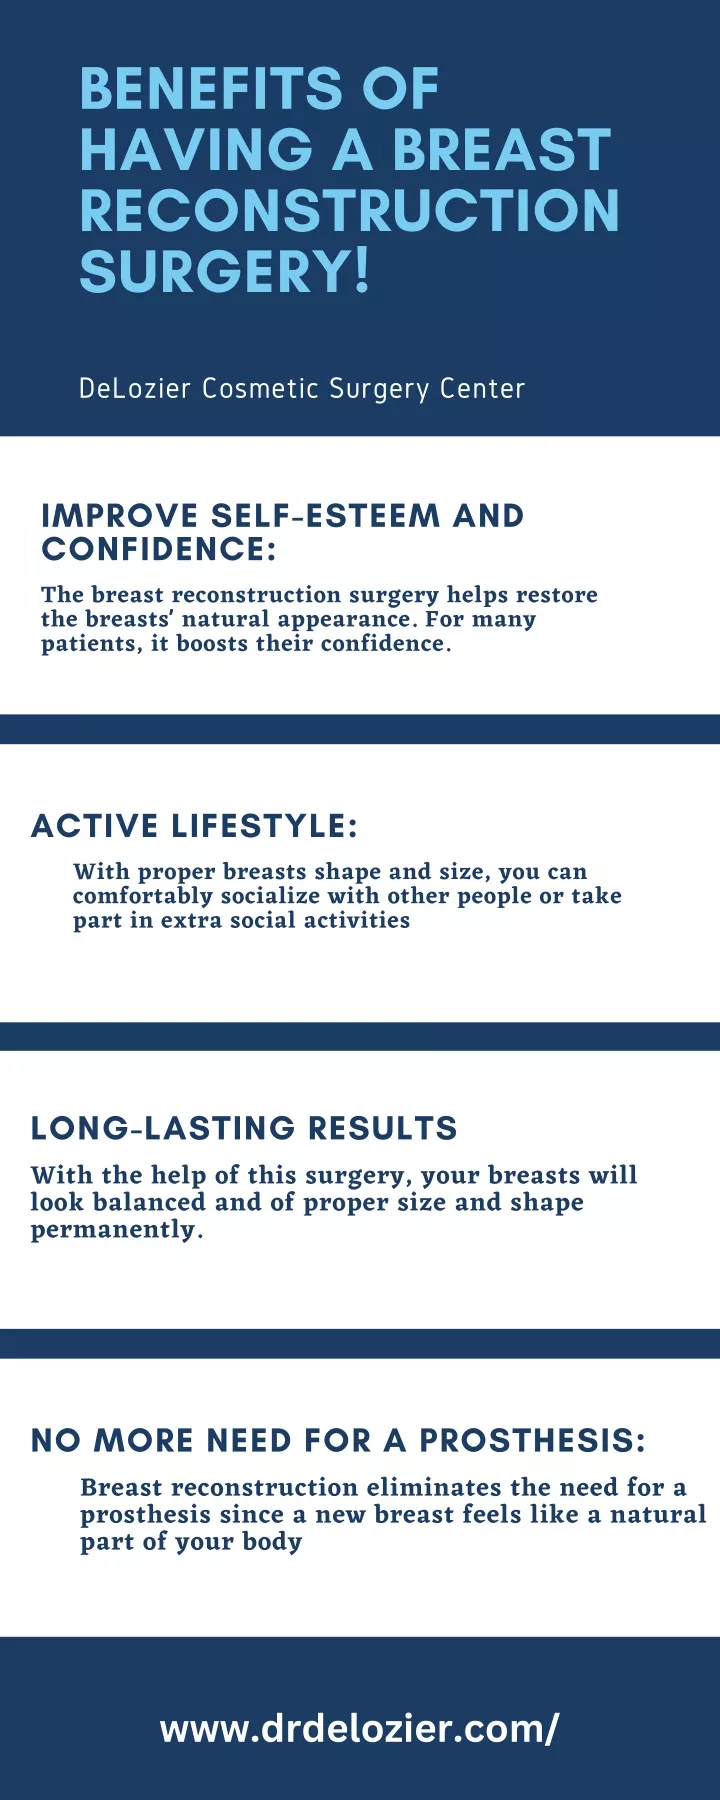 benefits of having a breast reconstruction surgery